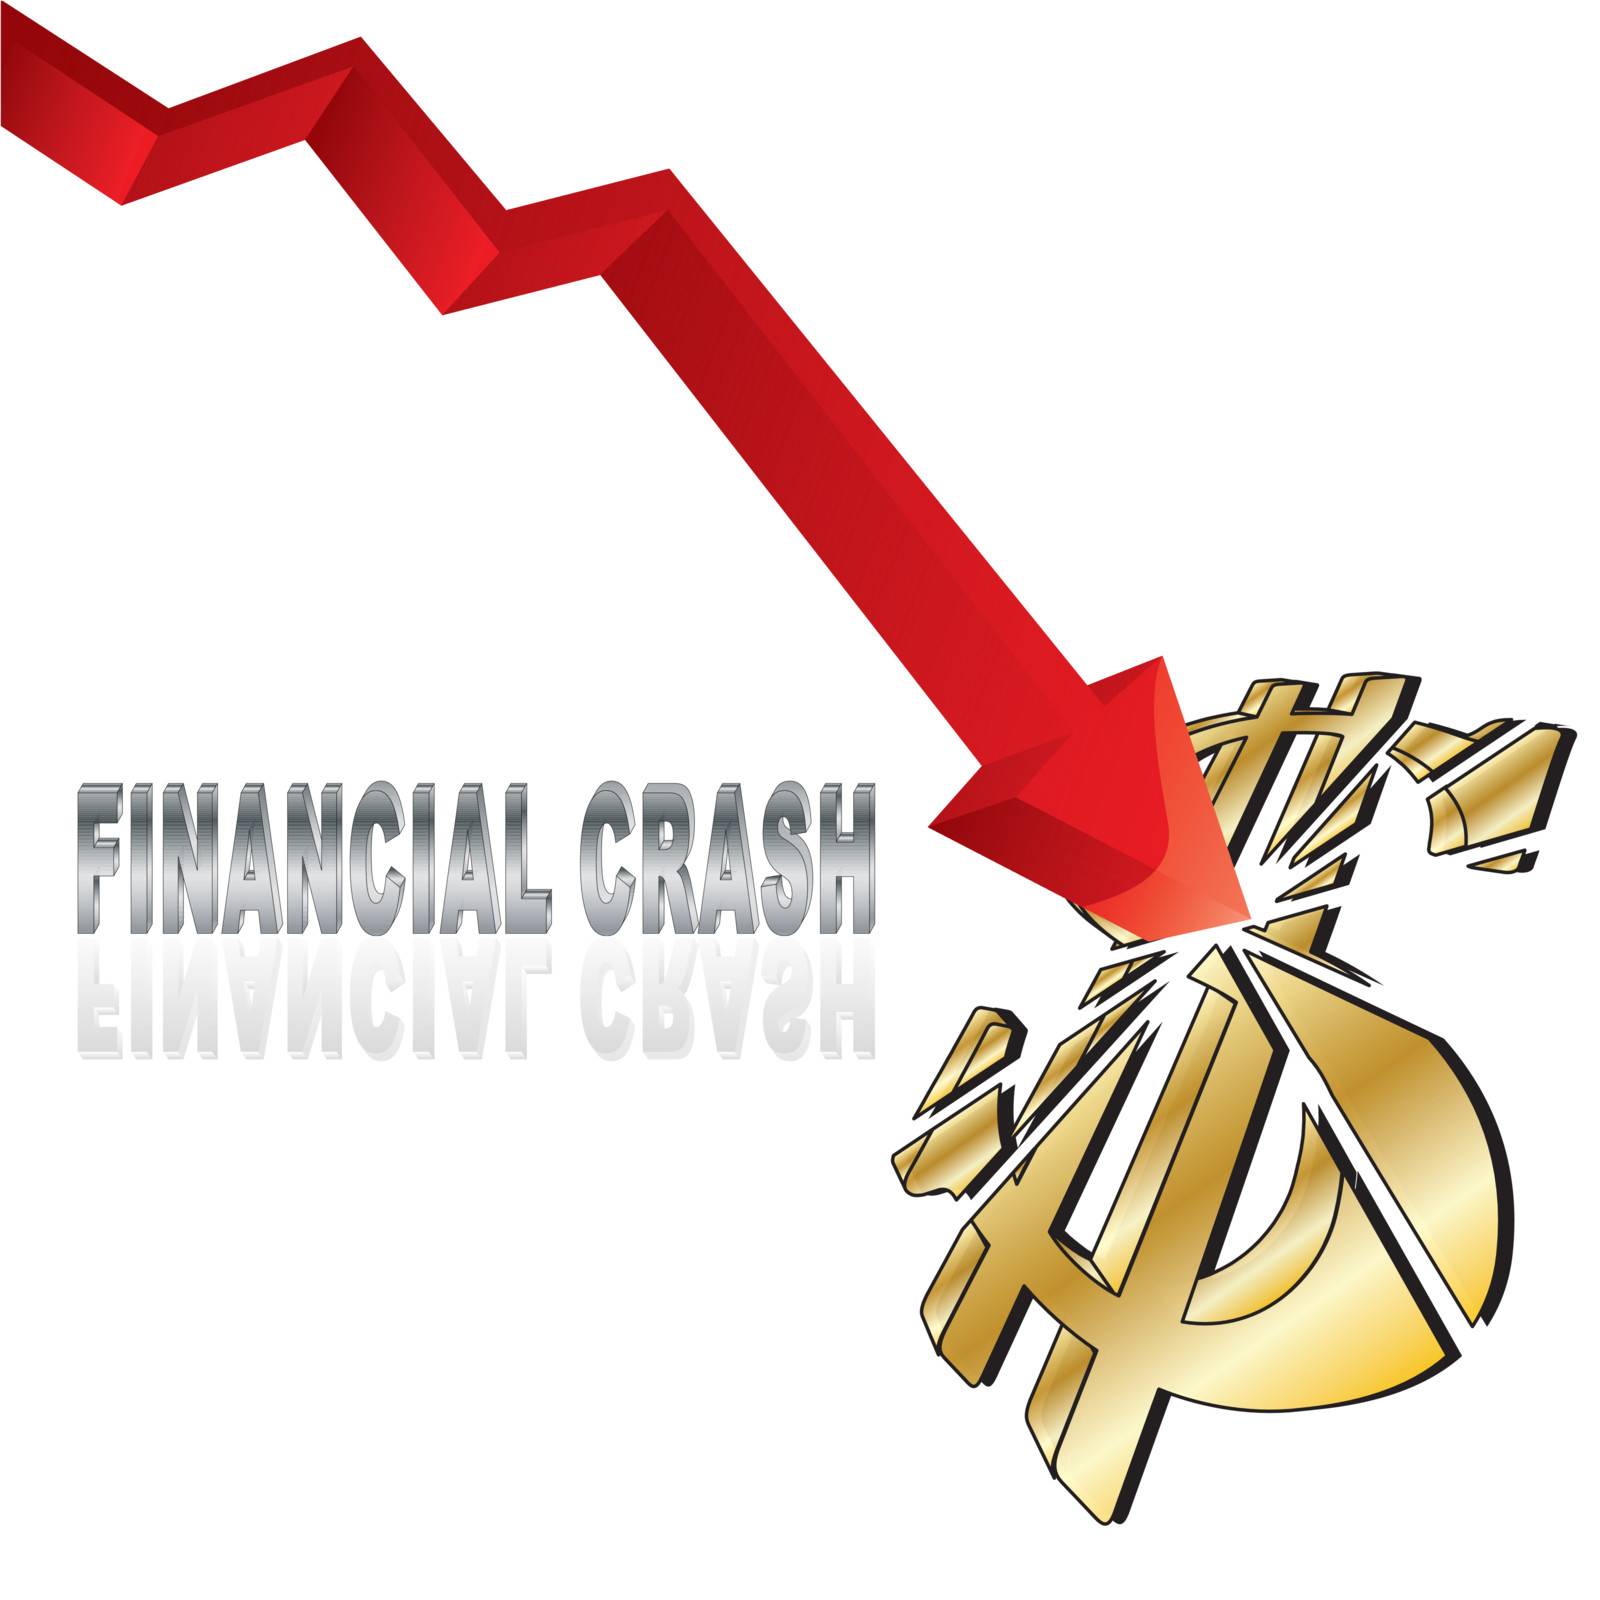 Financial crash with red diagram arrow smashing dollar sign and title vector illustration